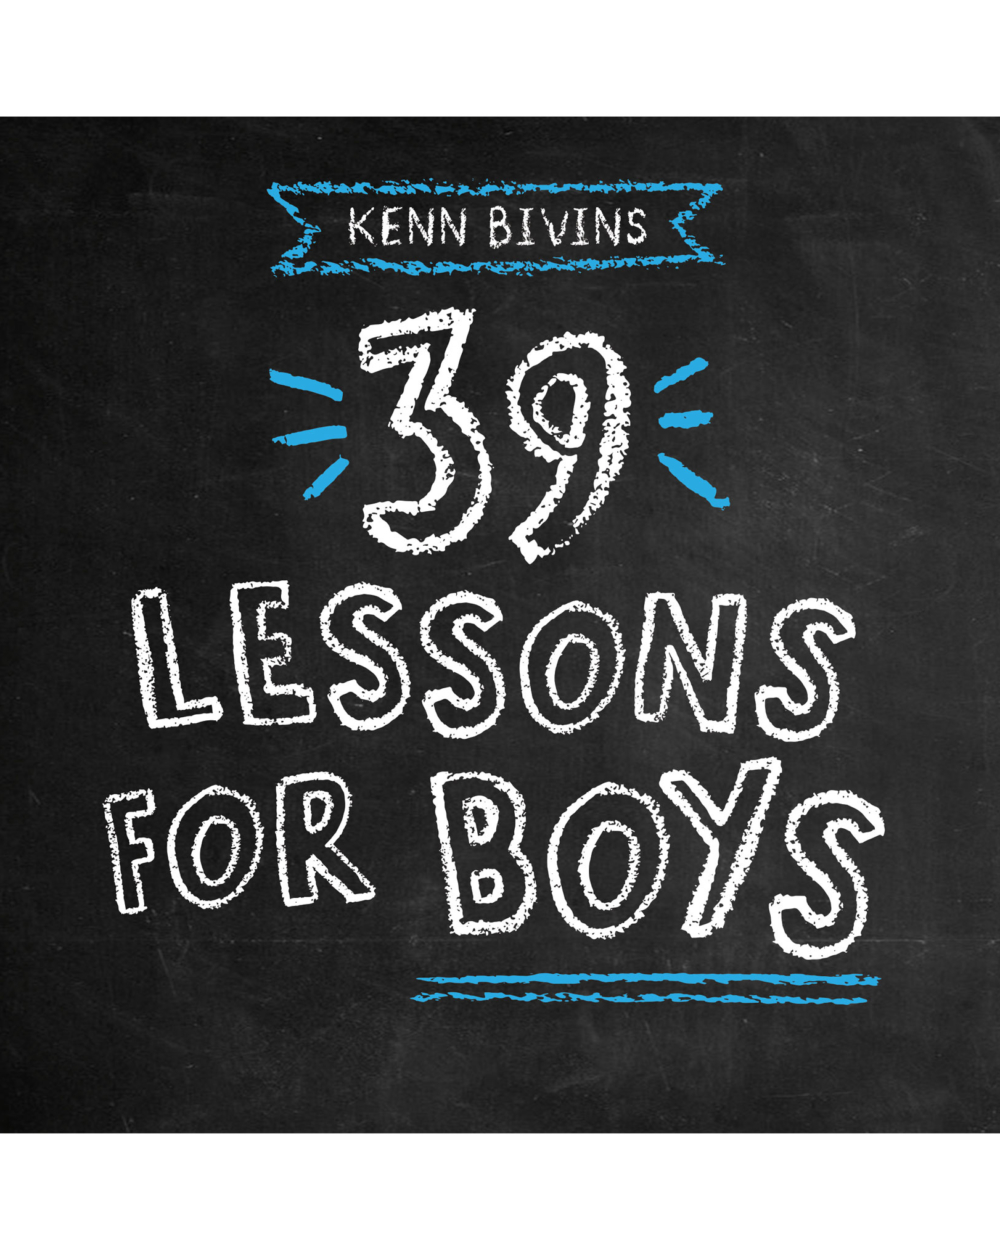 39 Lessons front